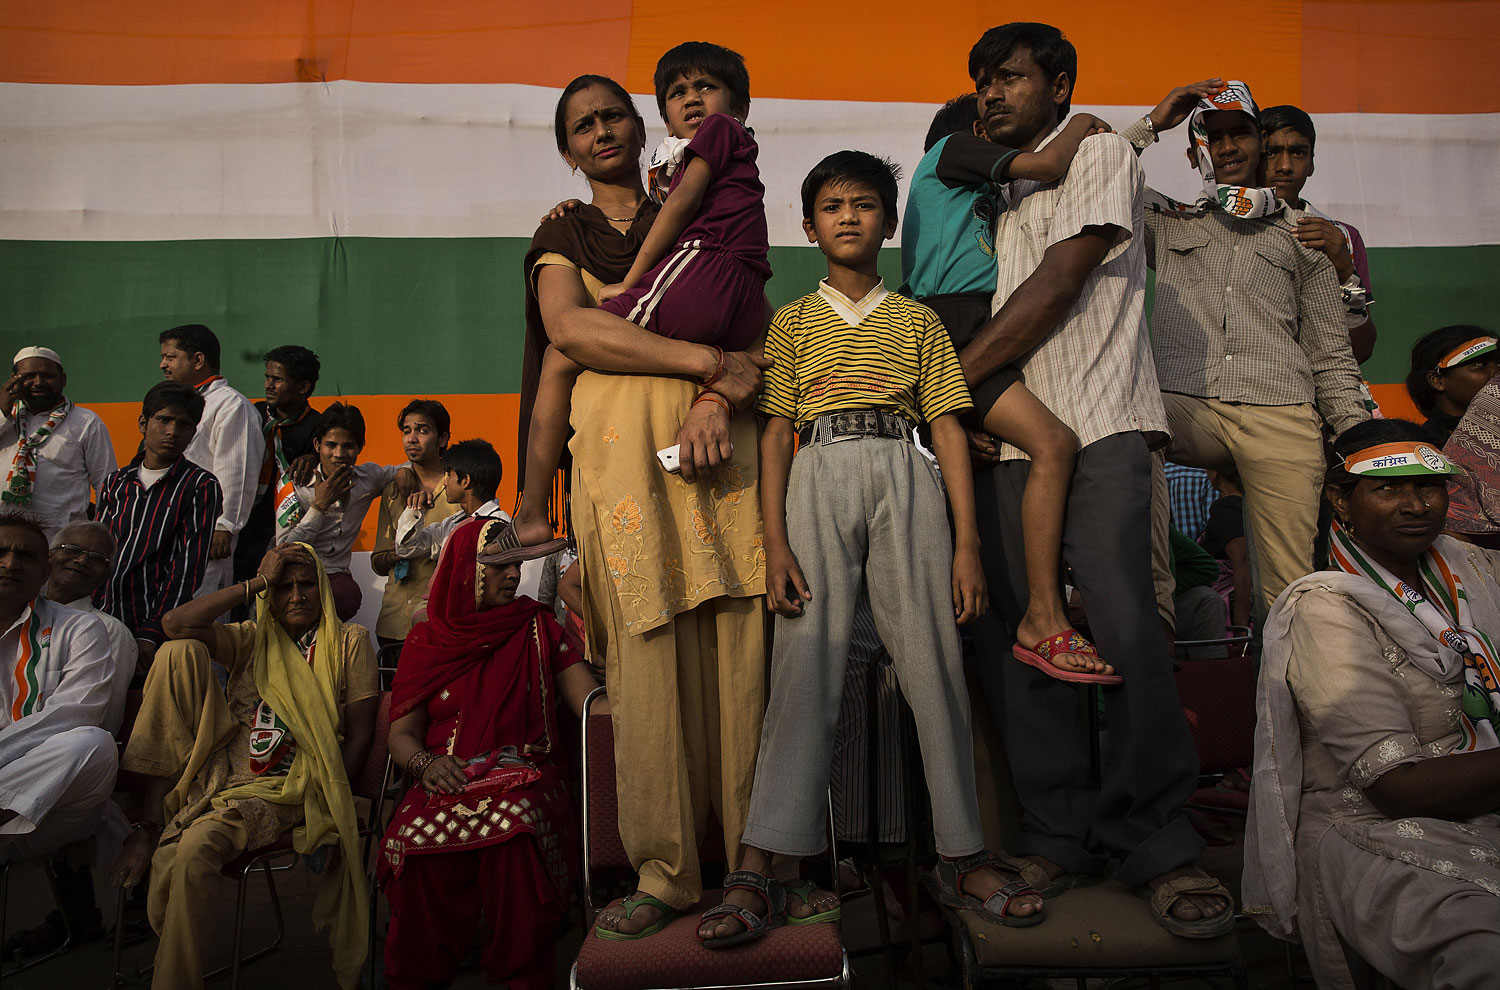 An Indian family listens as Rahul Gandhi, leader of India's ruling Congress Party speaks at a rally on April 6, 2014 in New Delhi.